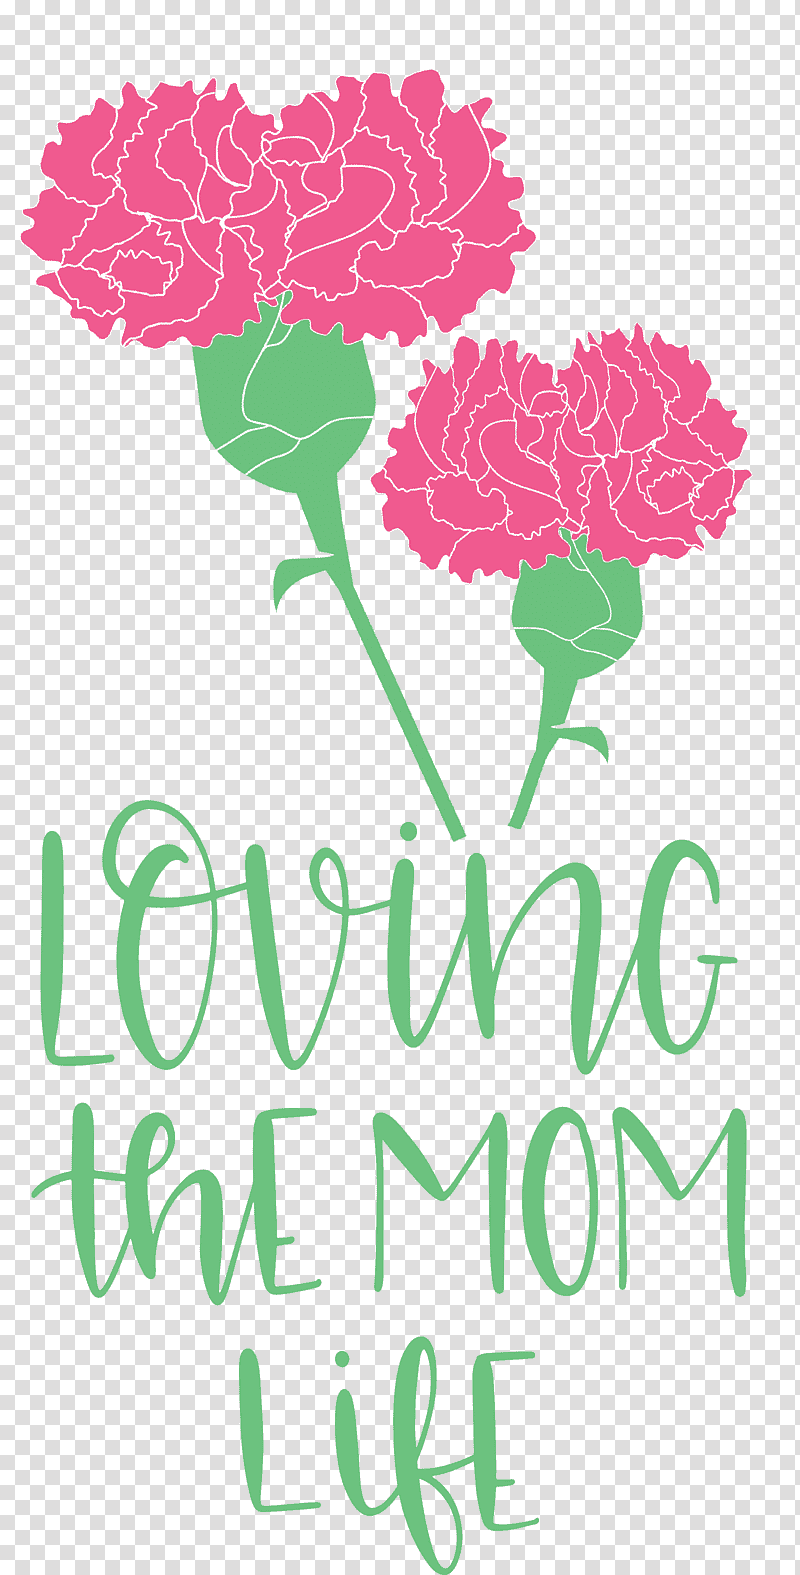 Mothers Day Mothers Day Quote Loving The Mom Life, Floral Design, Gift, Crabs, Cut Flowers, Car Park, Nosegay transparent background PNG clipart